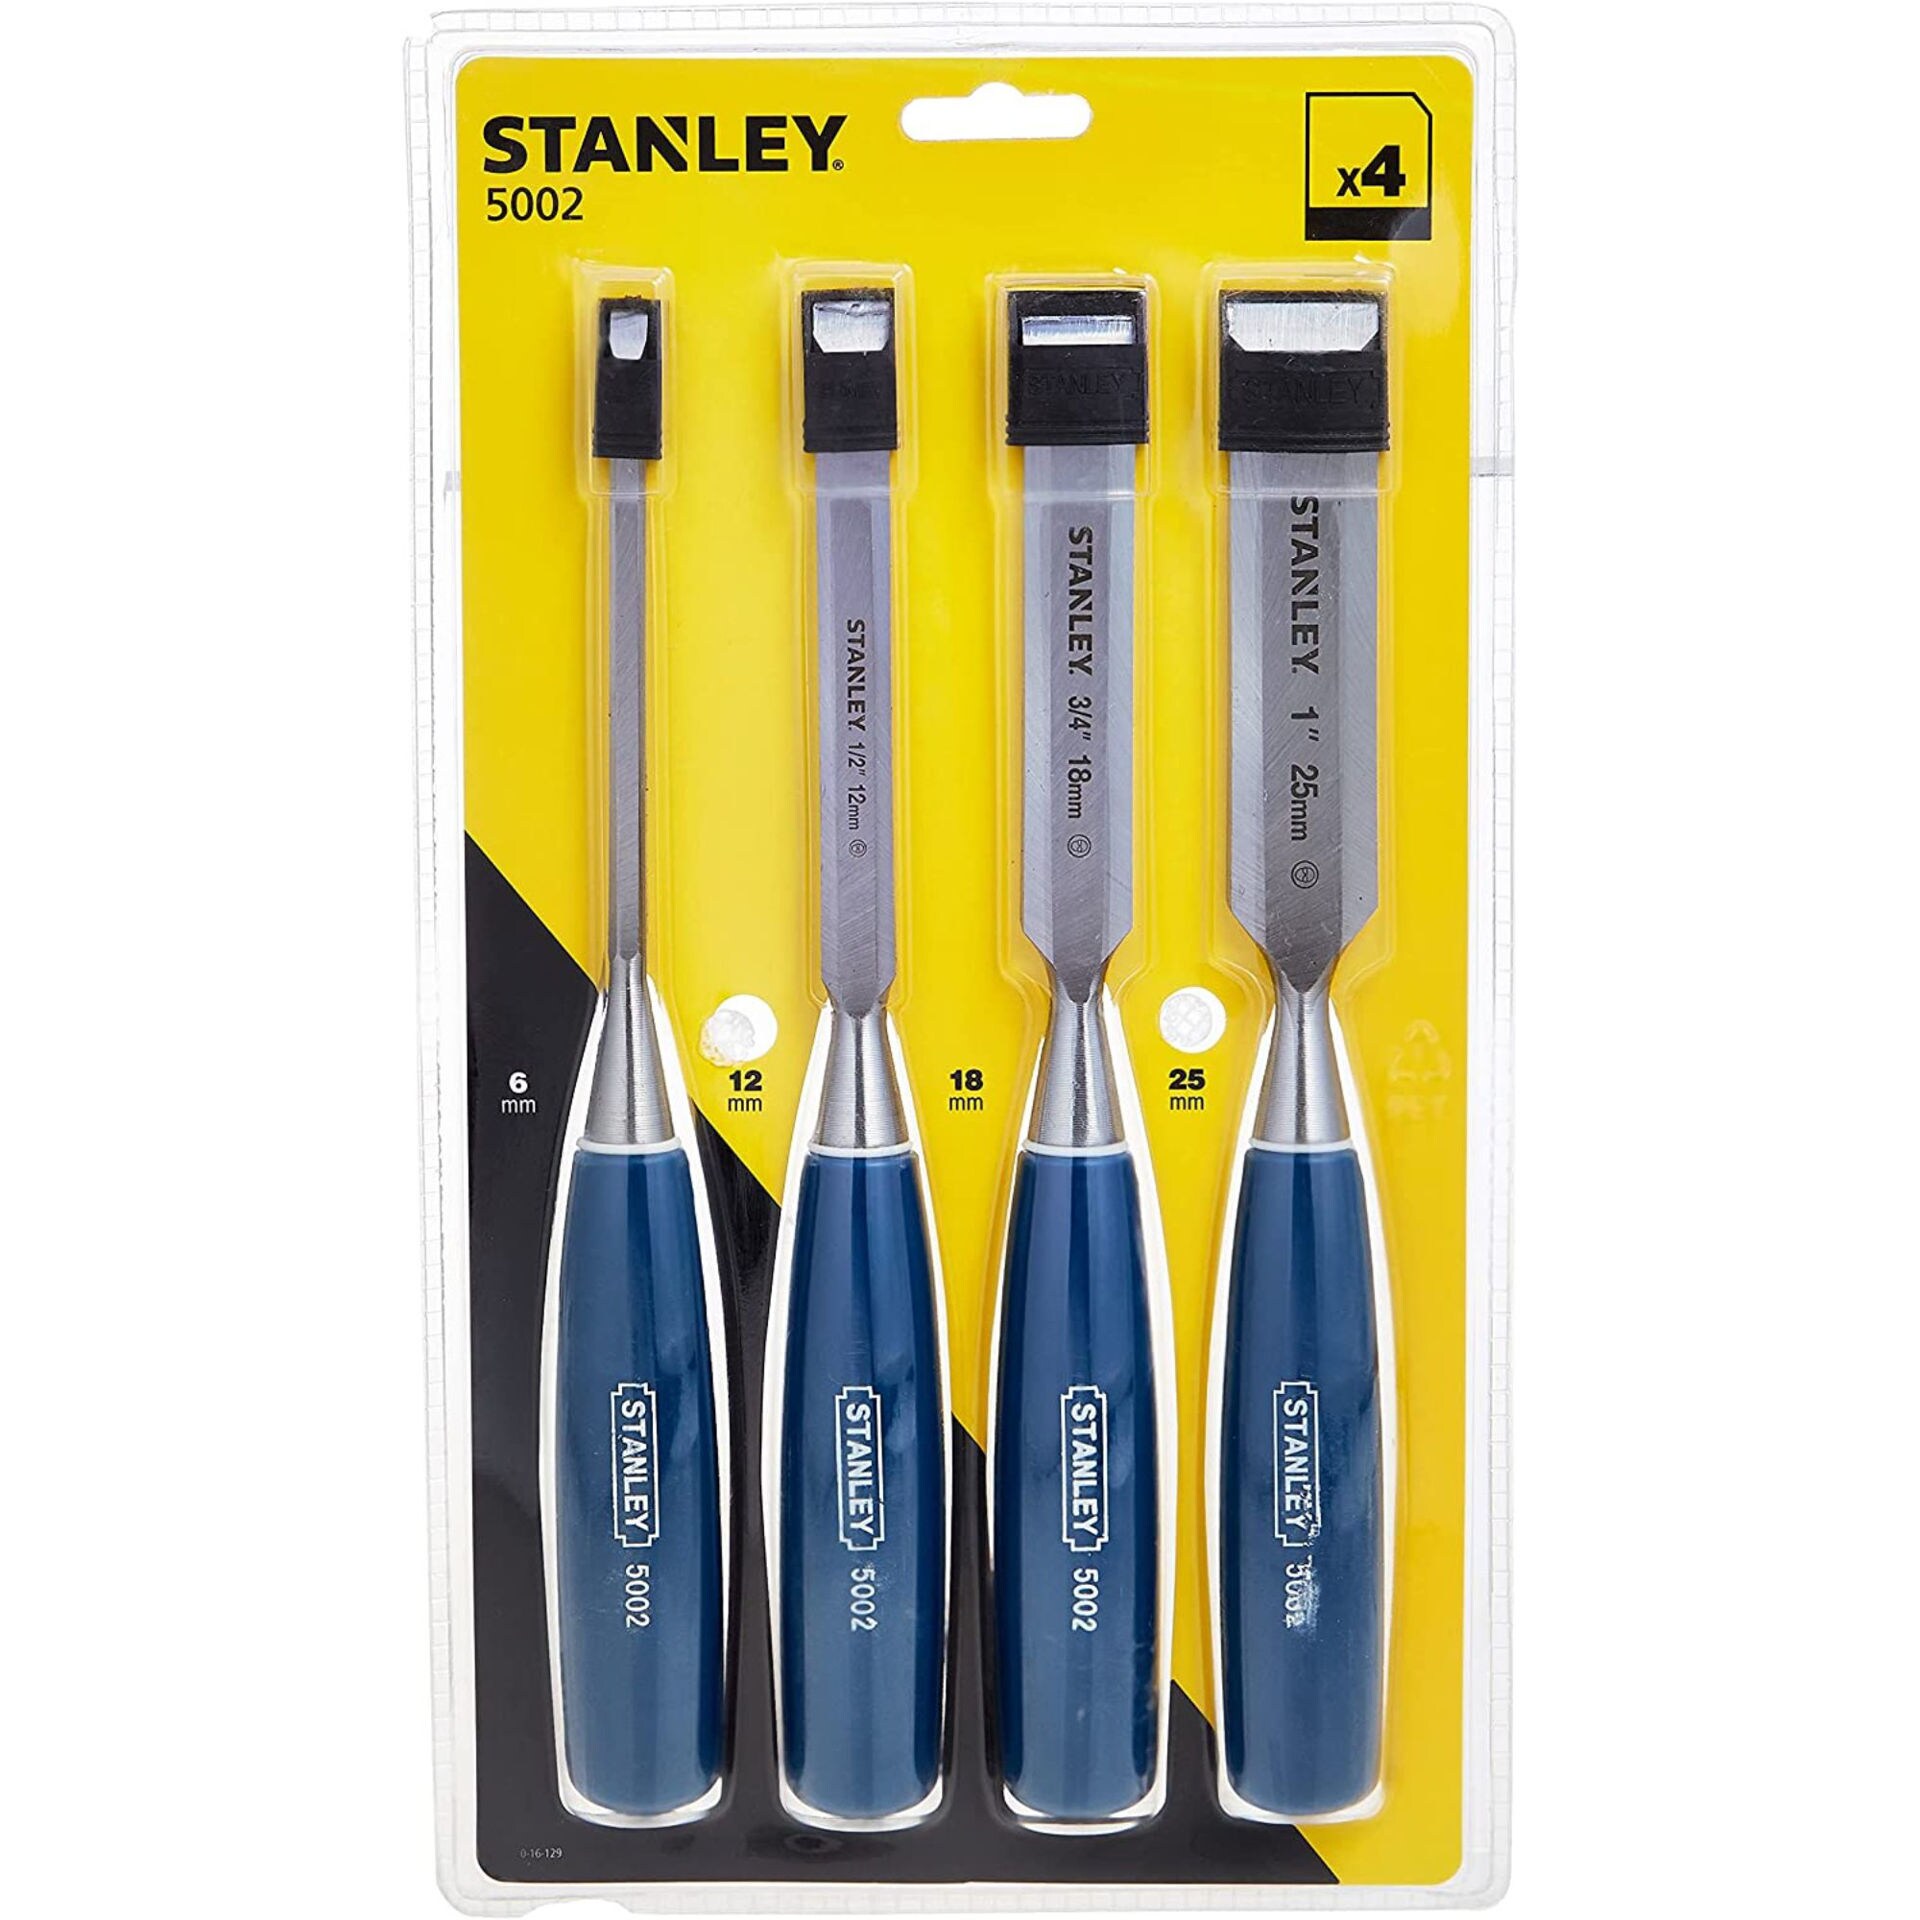 Stanley 5002 Bevel Edge Chisels with Blue Handle Set, Pack of 4pcs